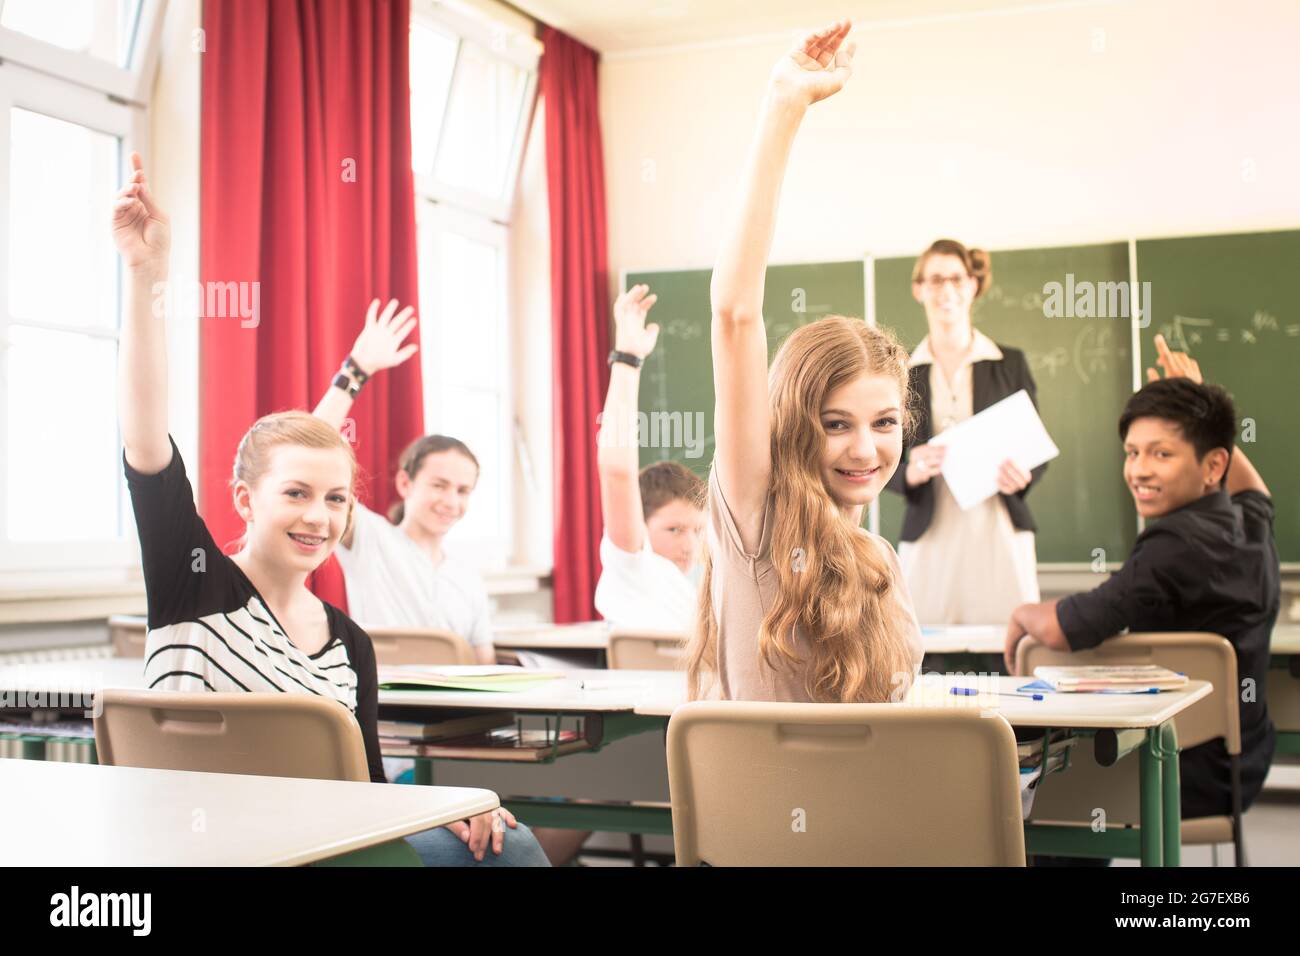 Math teacher standing in front of students who are well prepared to answer Stock Photo